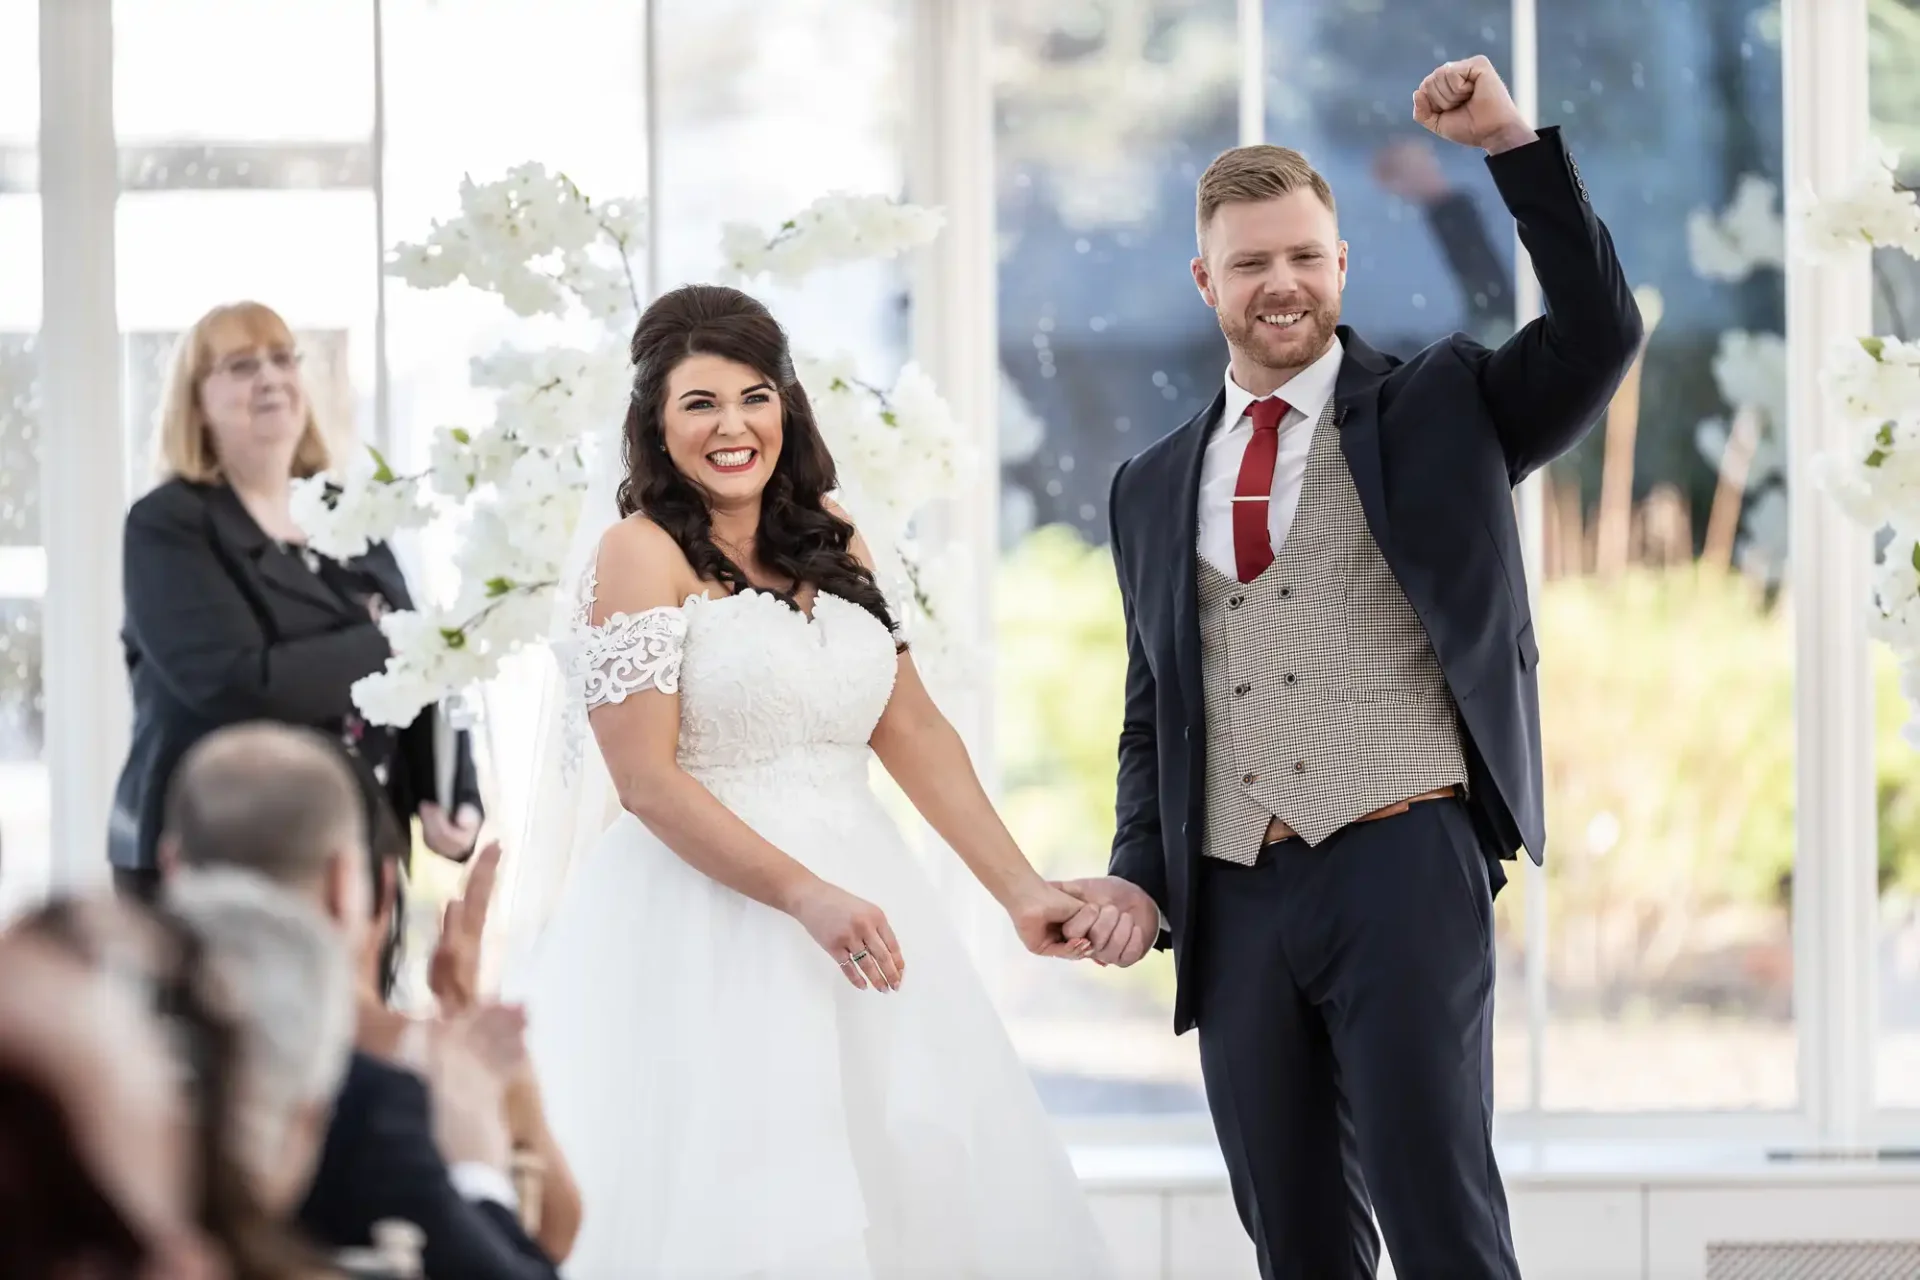 A bride and groom smiling and holding hands, the groom raising one fist in triumph, in a sunlit wedding venue with guests and an officiant in the background.